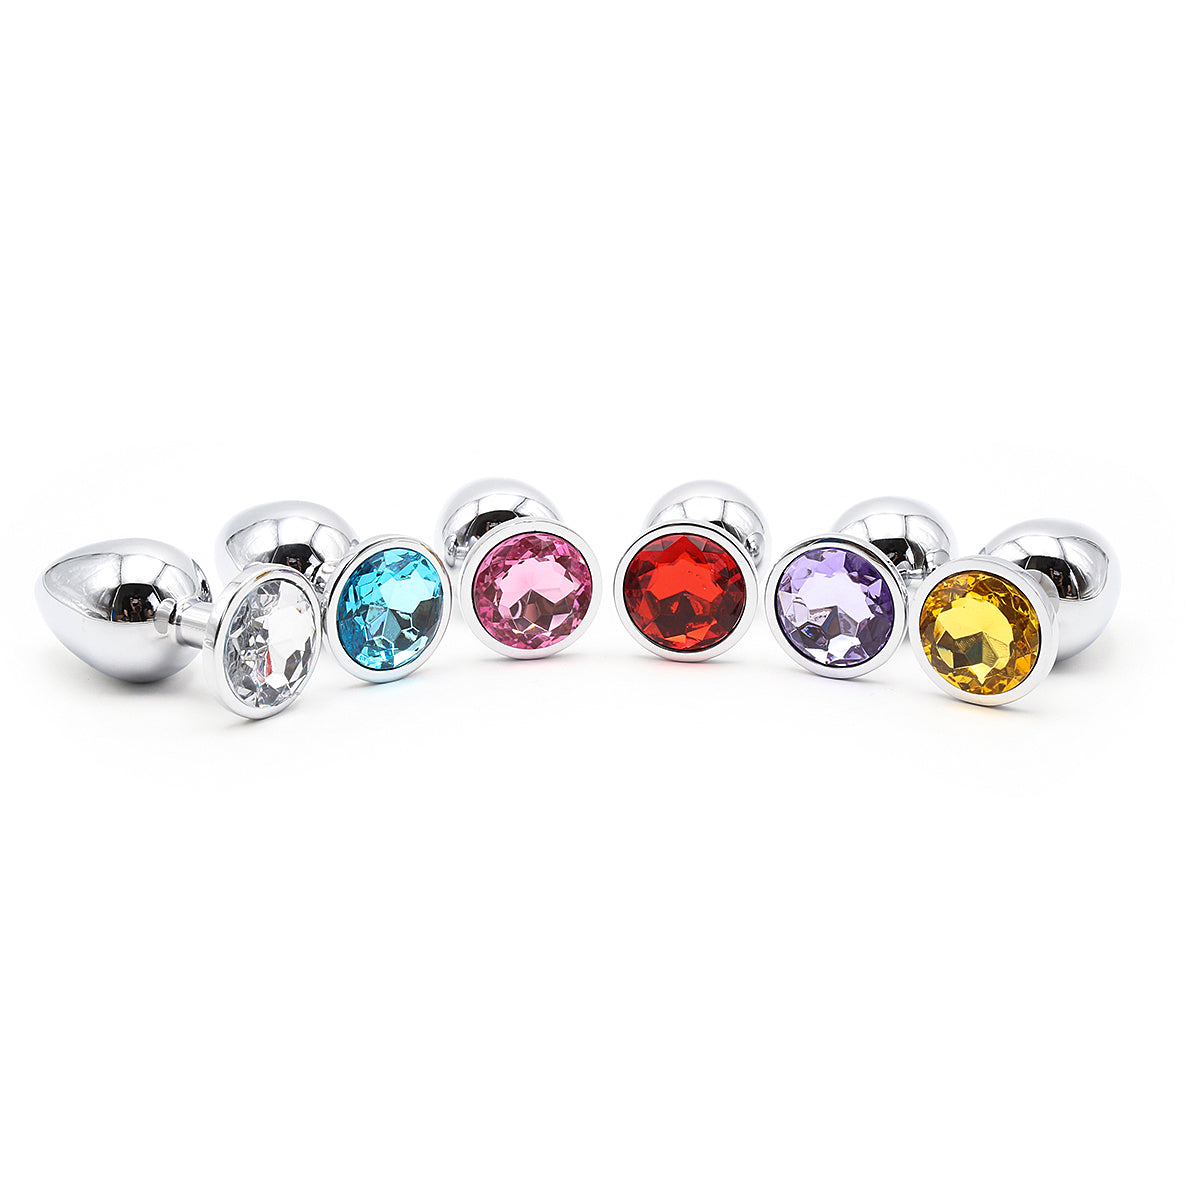 Medium Size Stainless Metal Butt Plug(Six Colors Available)